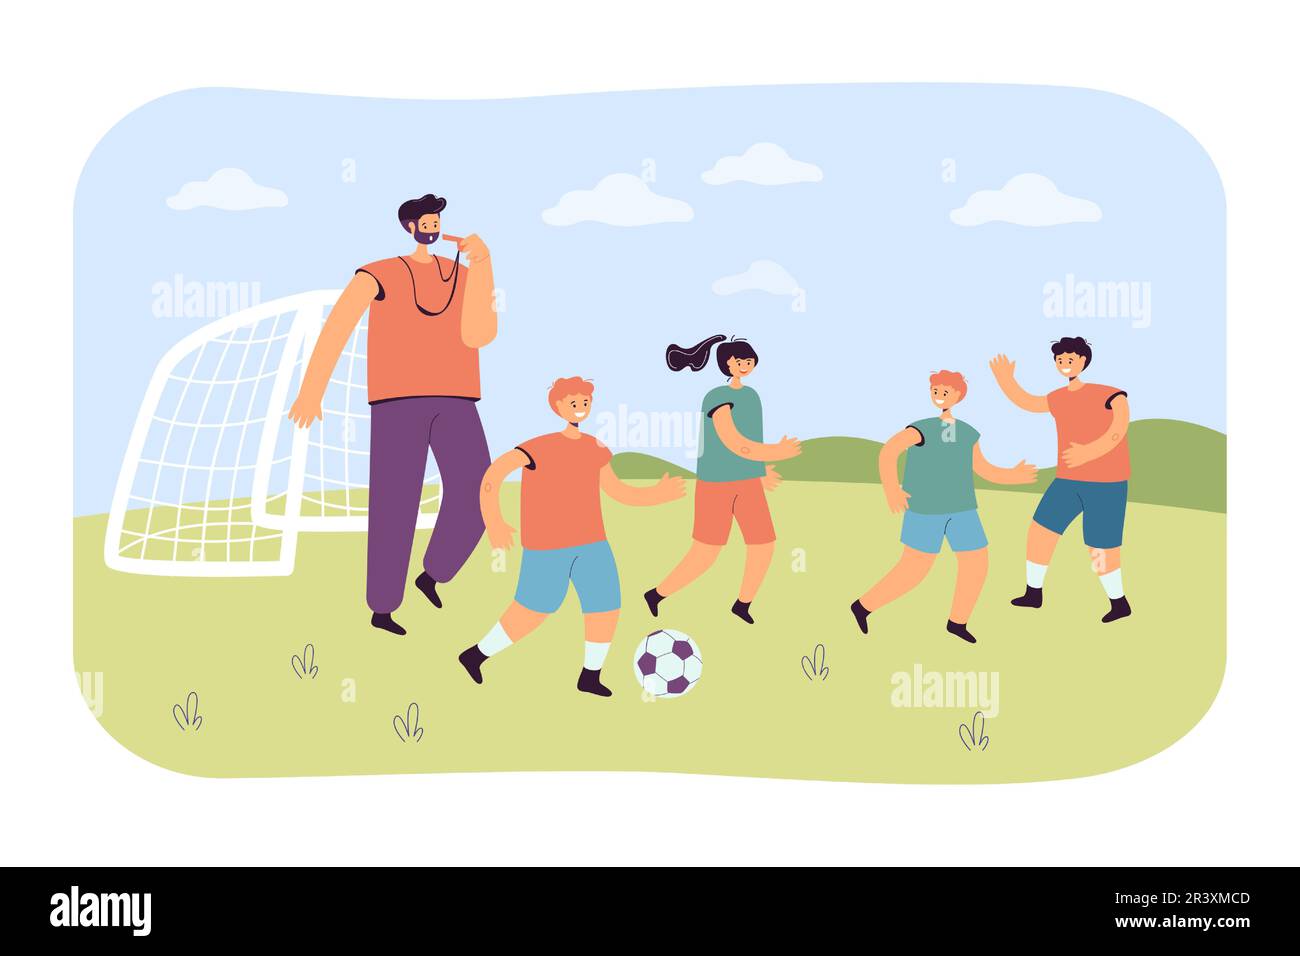 Team of little football players with coach Stock Vector